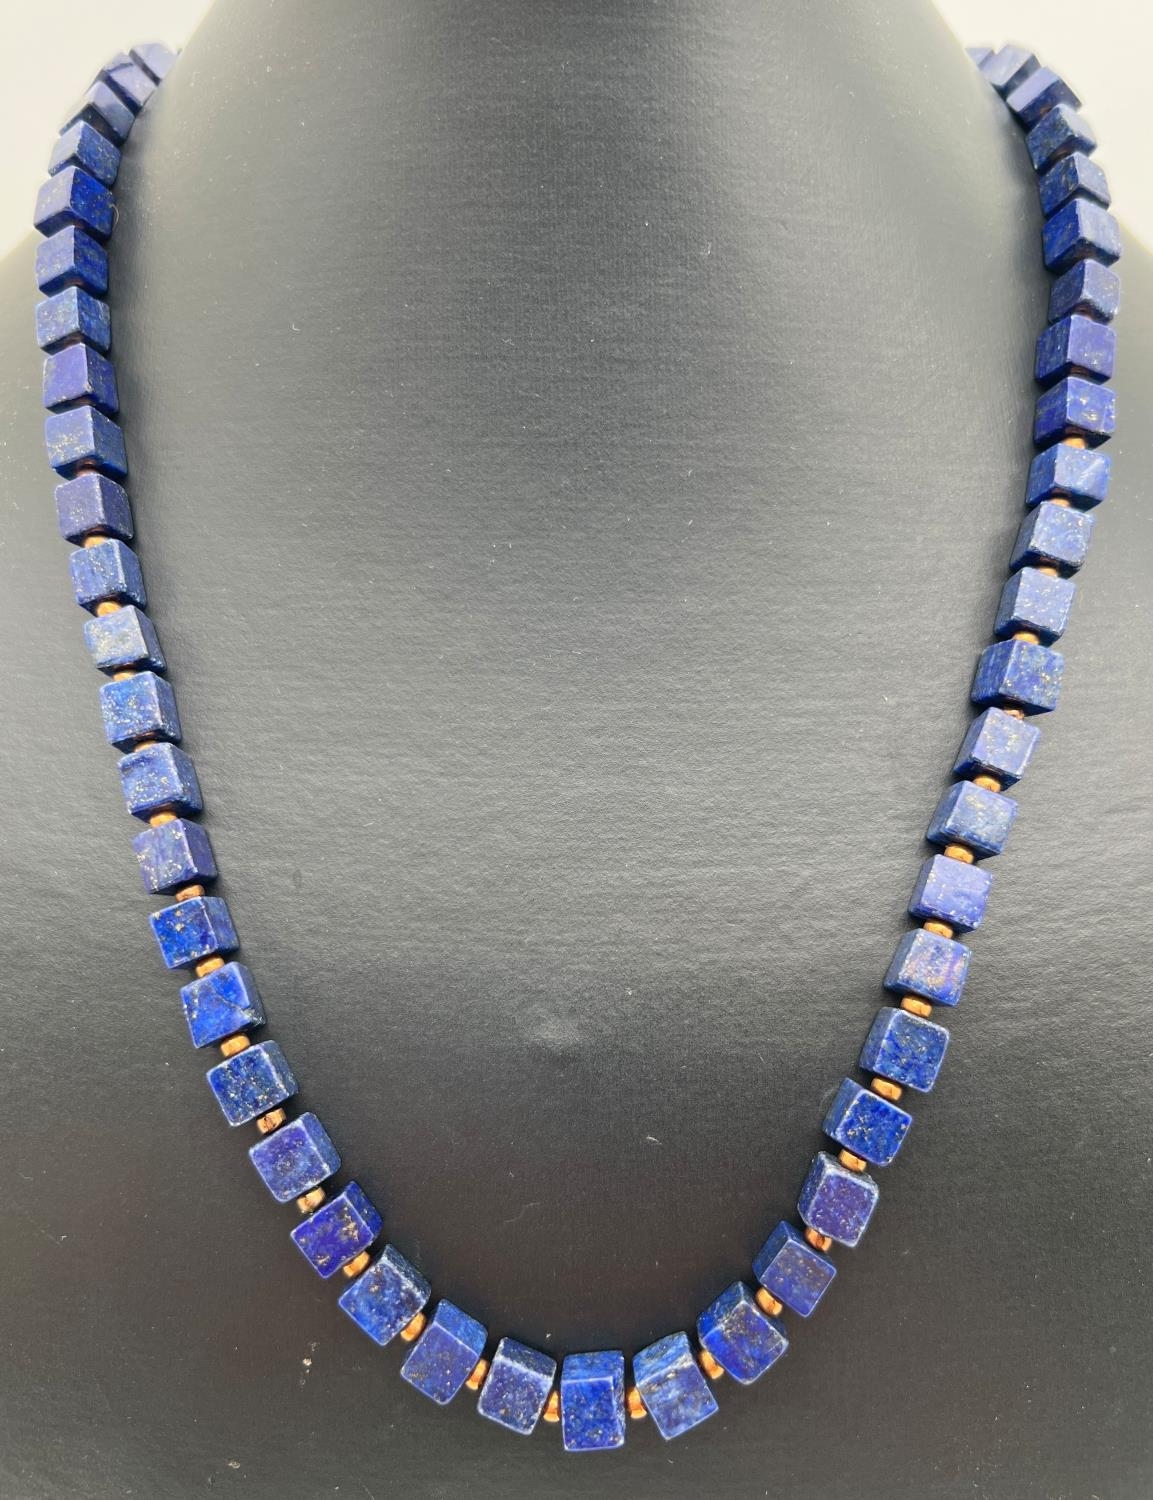 A 19" lapis lazuli beaded necklace of cube shaped beads, with gold tone S shaped clasp & spacer